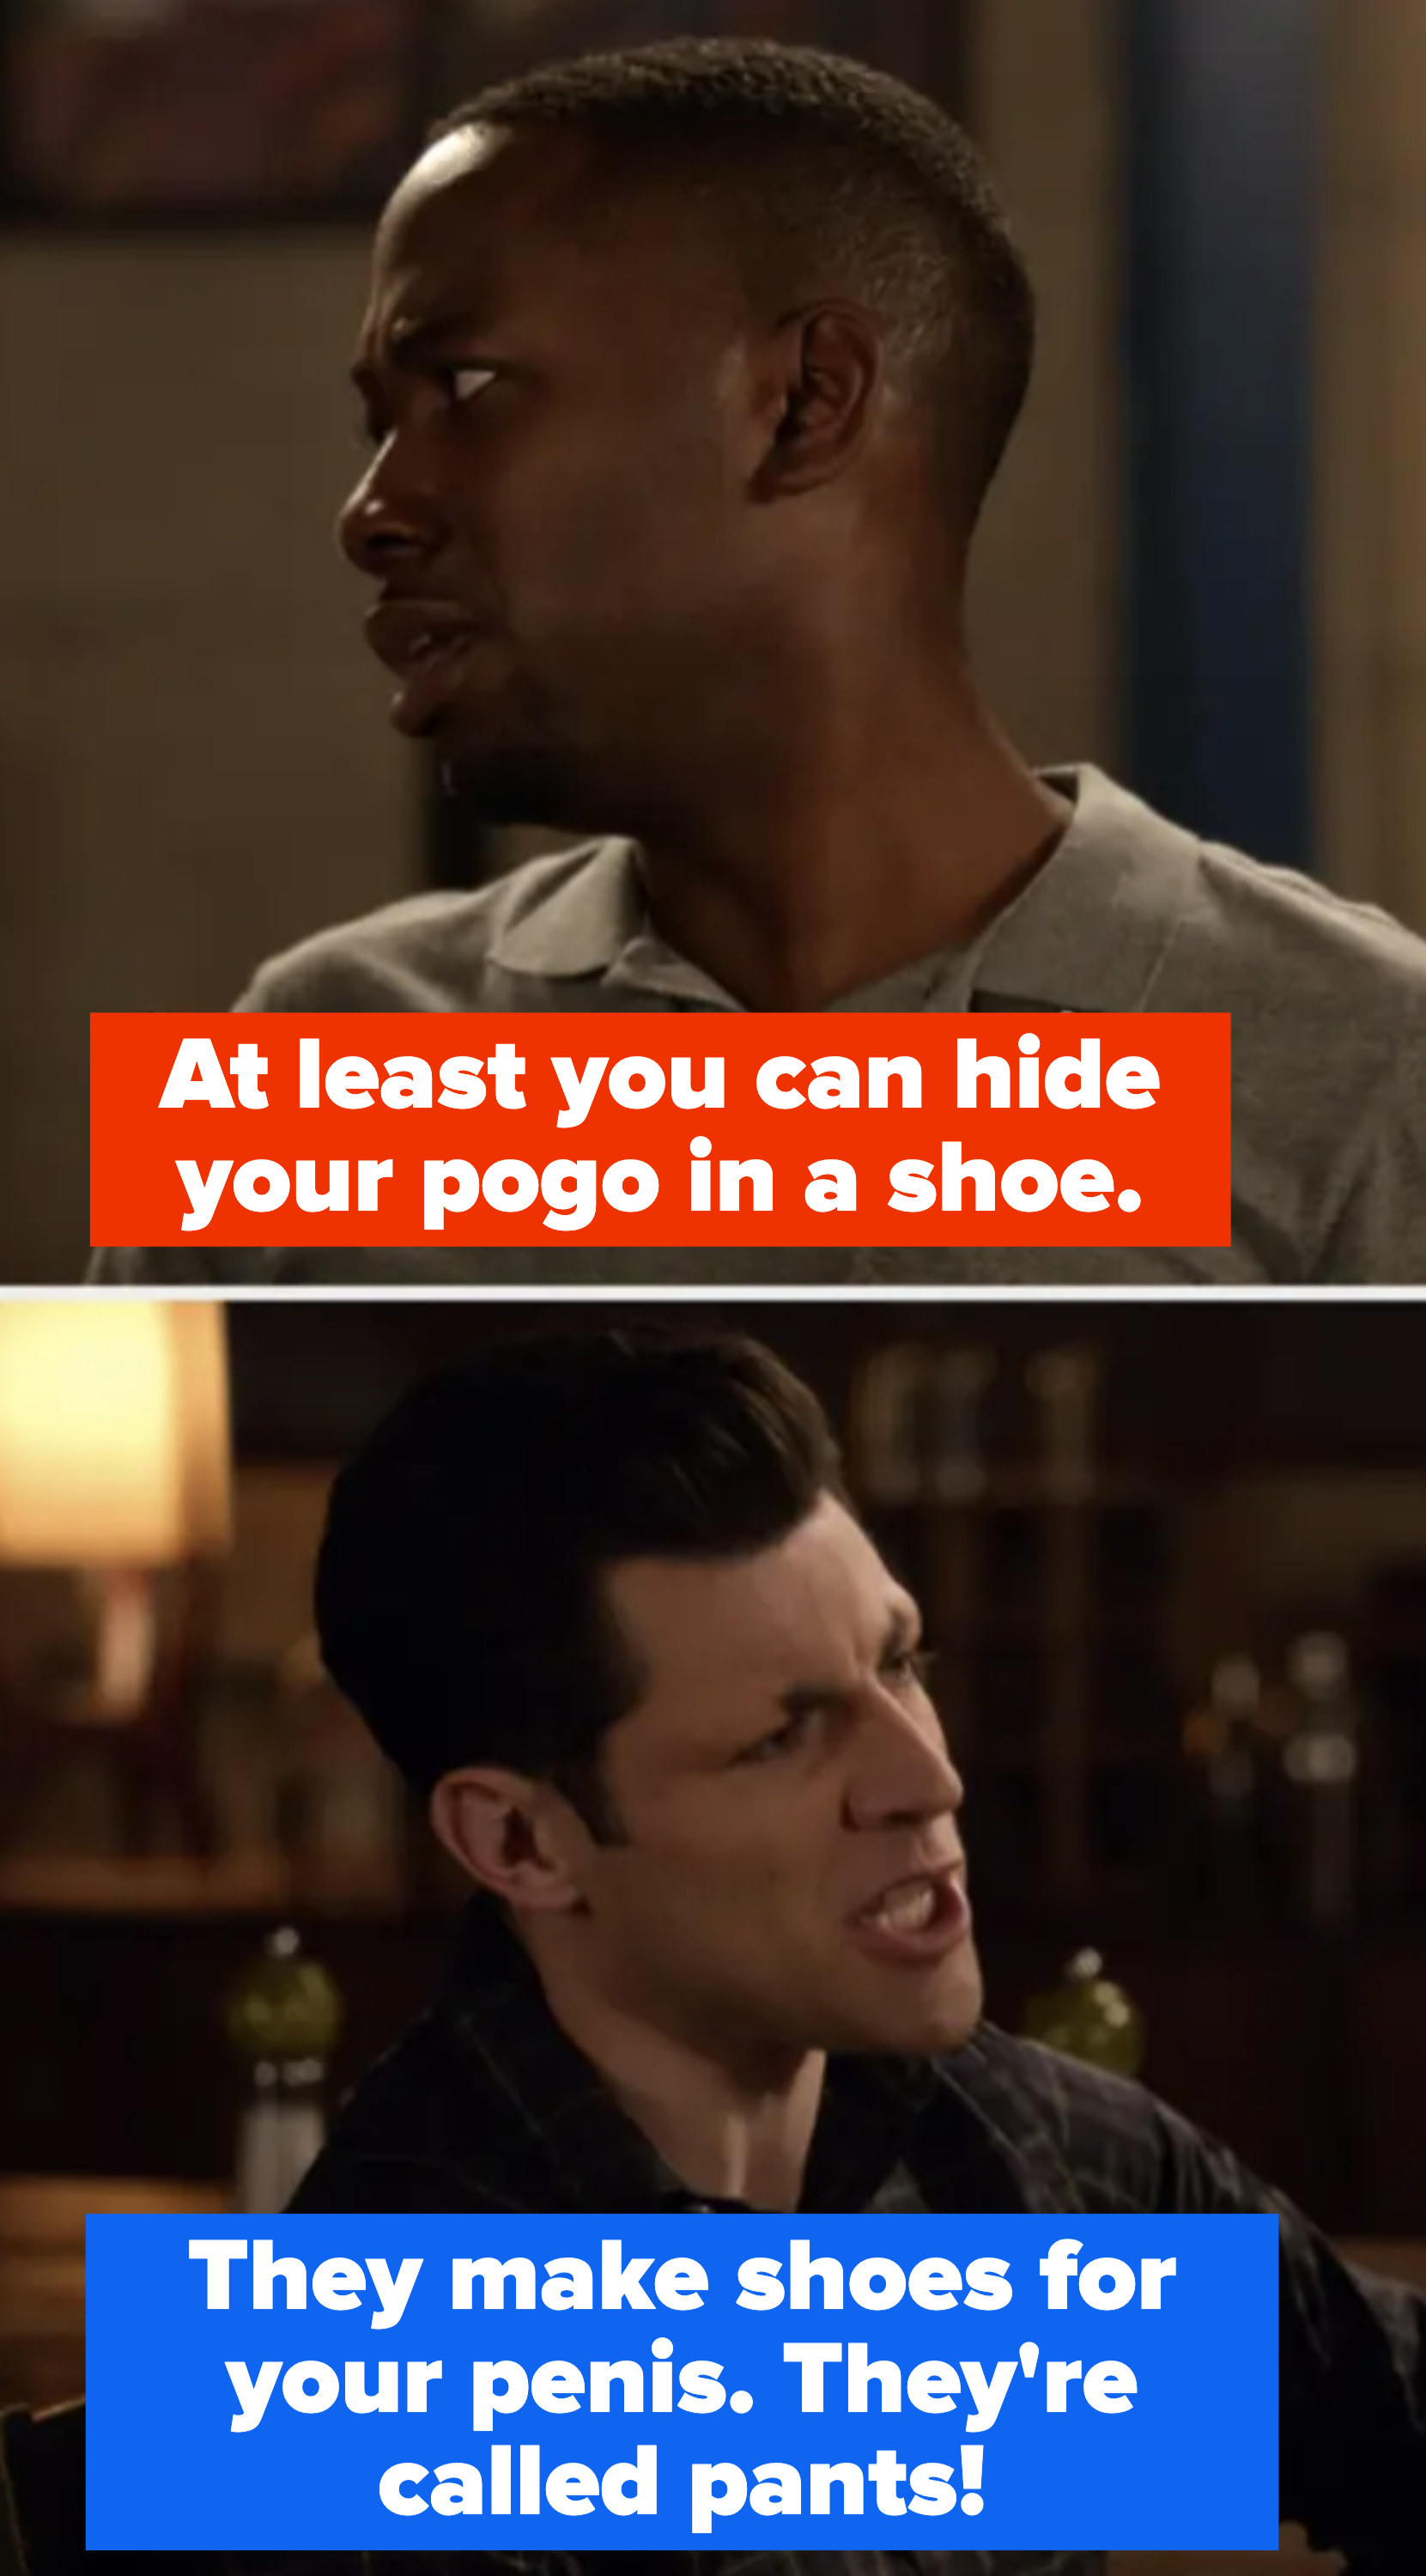 Winston says, &quot;At least you can hide your pogo in a shoe,&quot; so Schmidt replies, &quot;They make shoes for your penis. They&#x27;re called pants&quot;